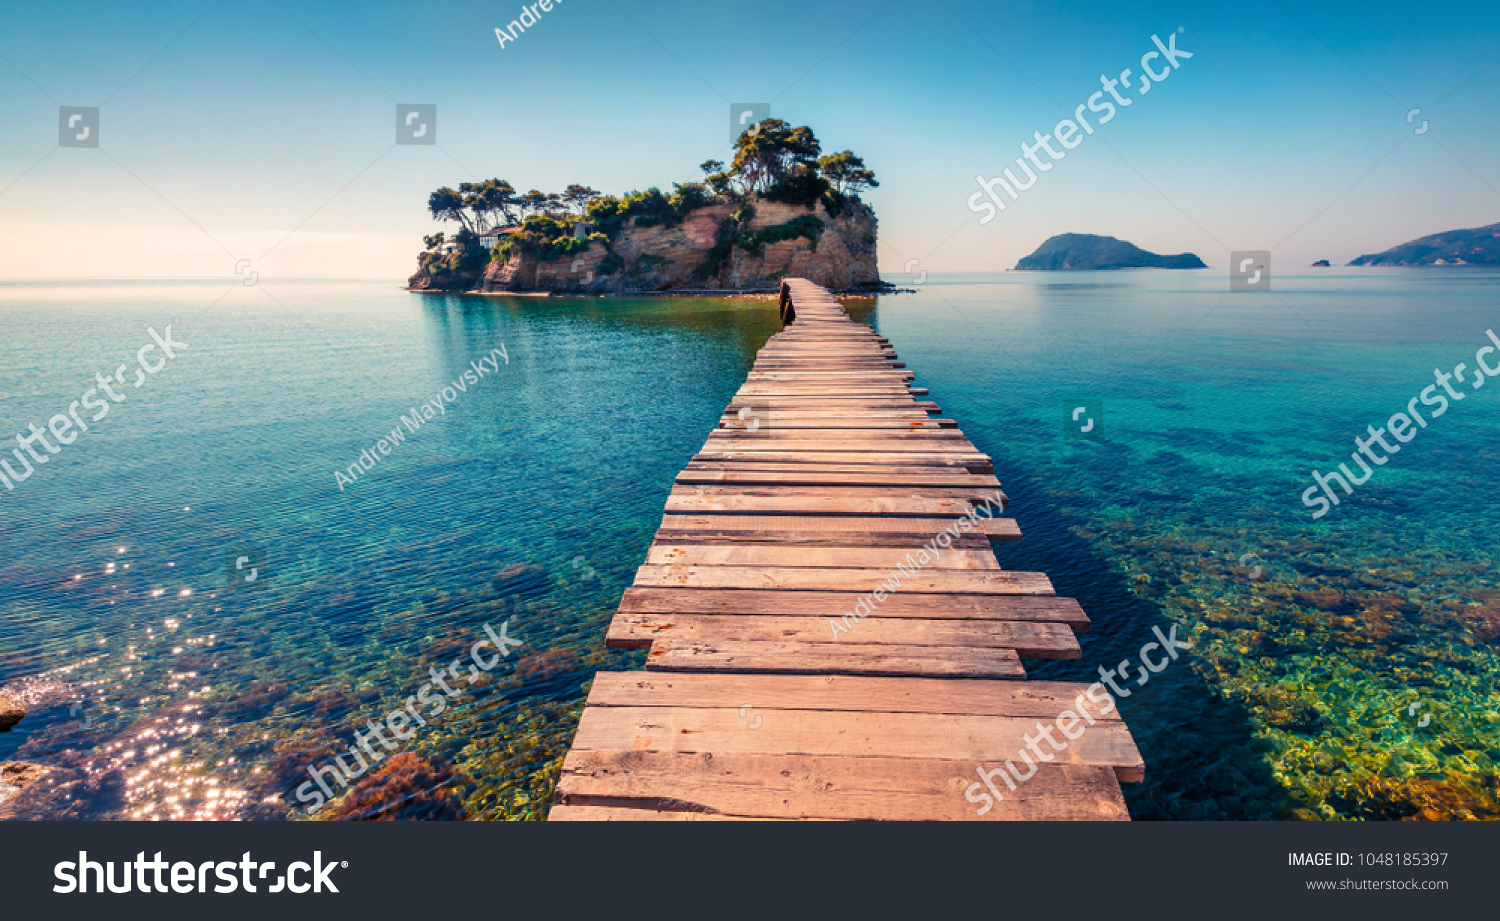 Bright spring view of the Cameo Island. Picturesque morning scene on the Port Sostis, Zakinthos island, Greece, Europe. Beauty of nature concept background. #1048185397